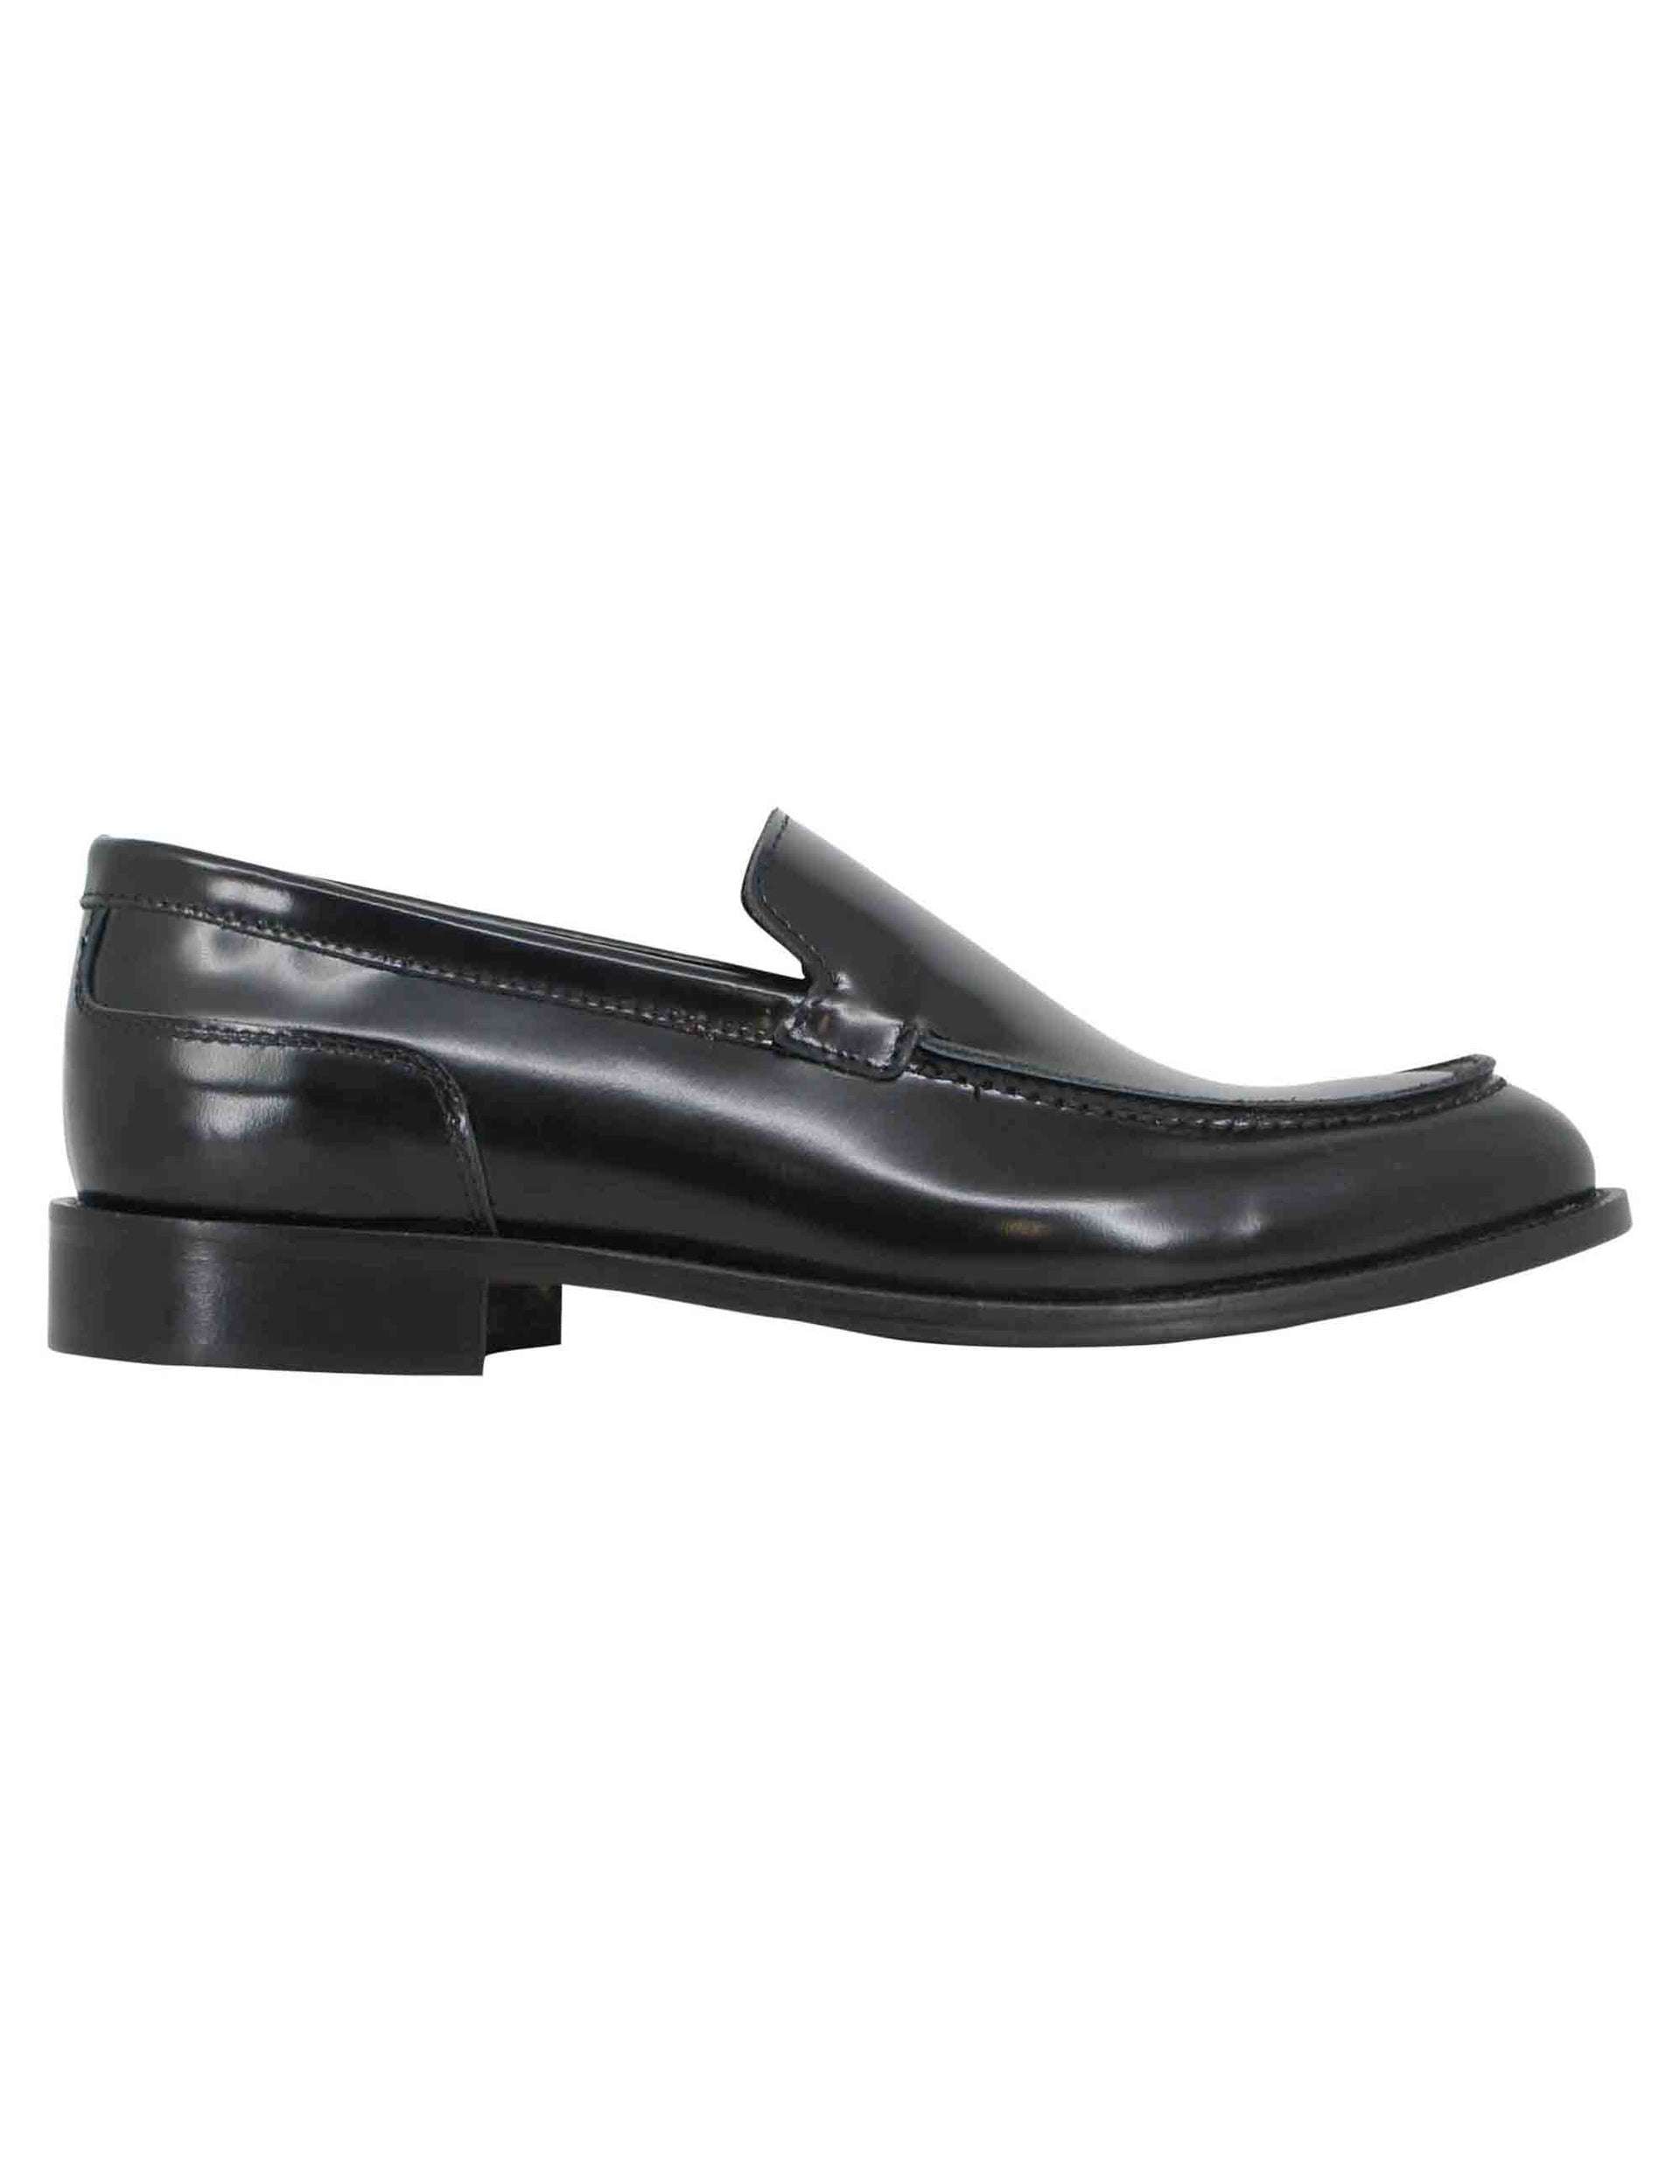 Men's black leather loafers with smooth flap and stitched leather sole